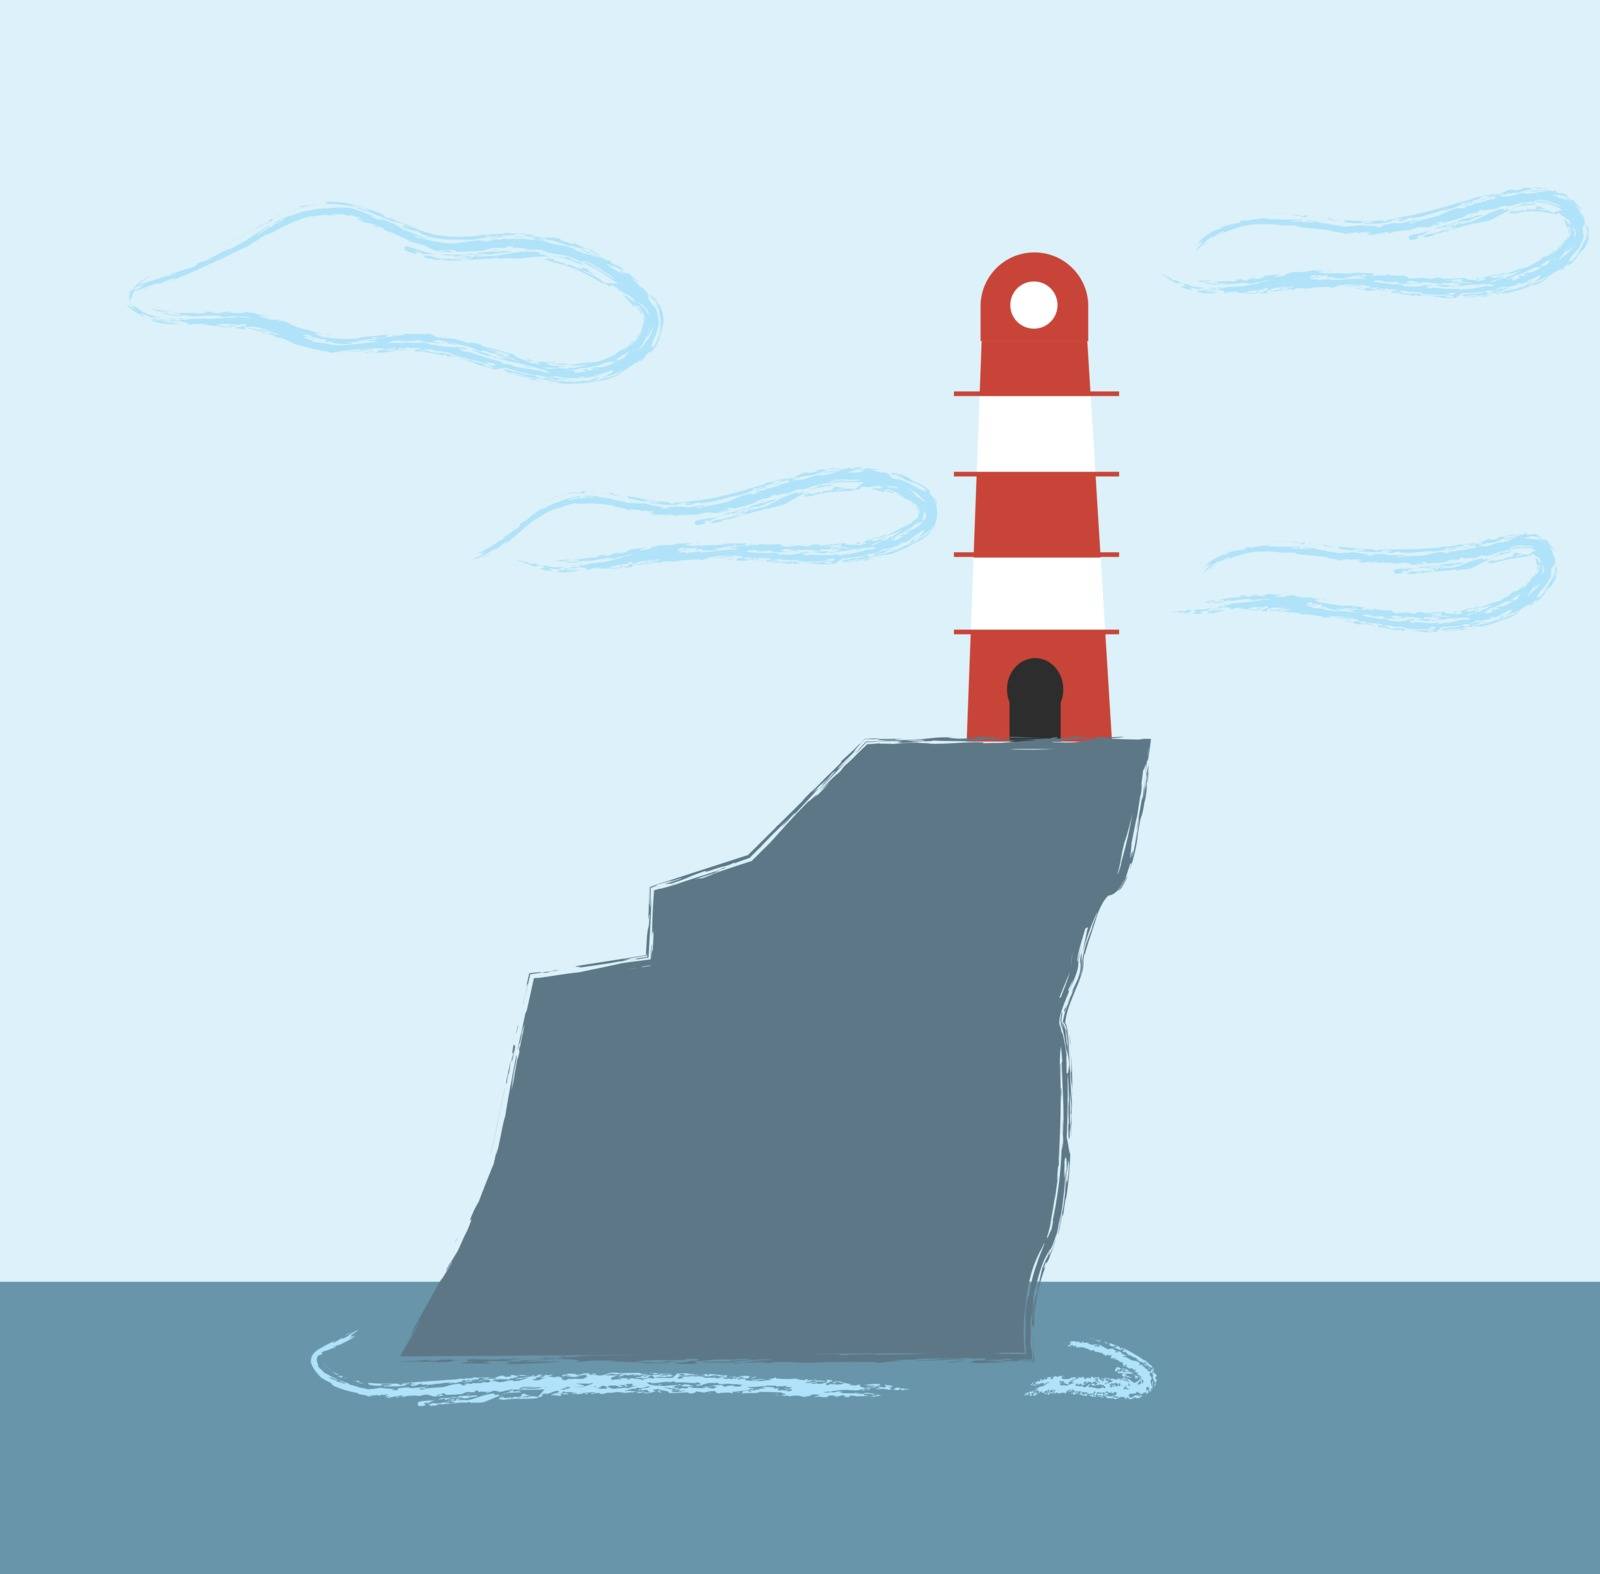 A cartoon lighthouse with alternate red and light bands stands as a tower to warn or guide ships at sea  vector  color drawing or illustration